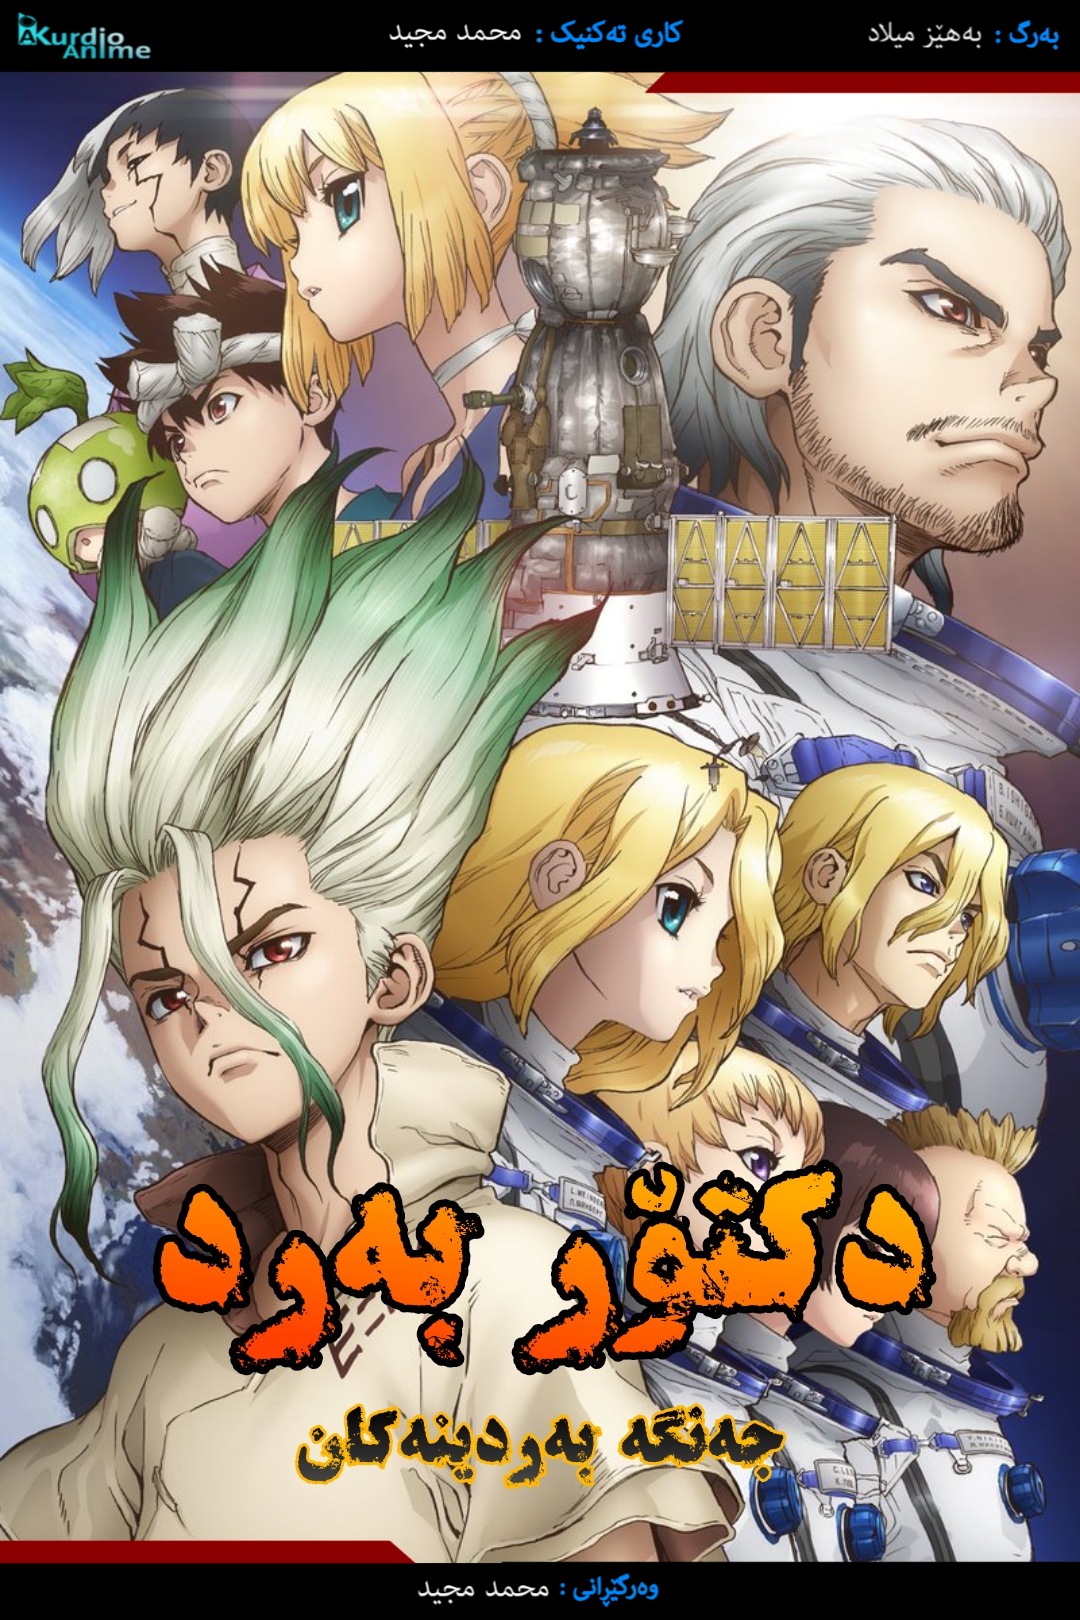 Dr. stone S2 - Ep 02